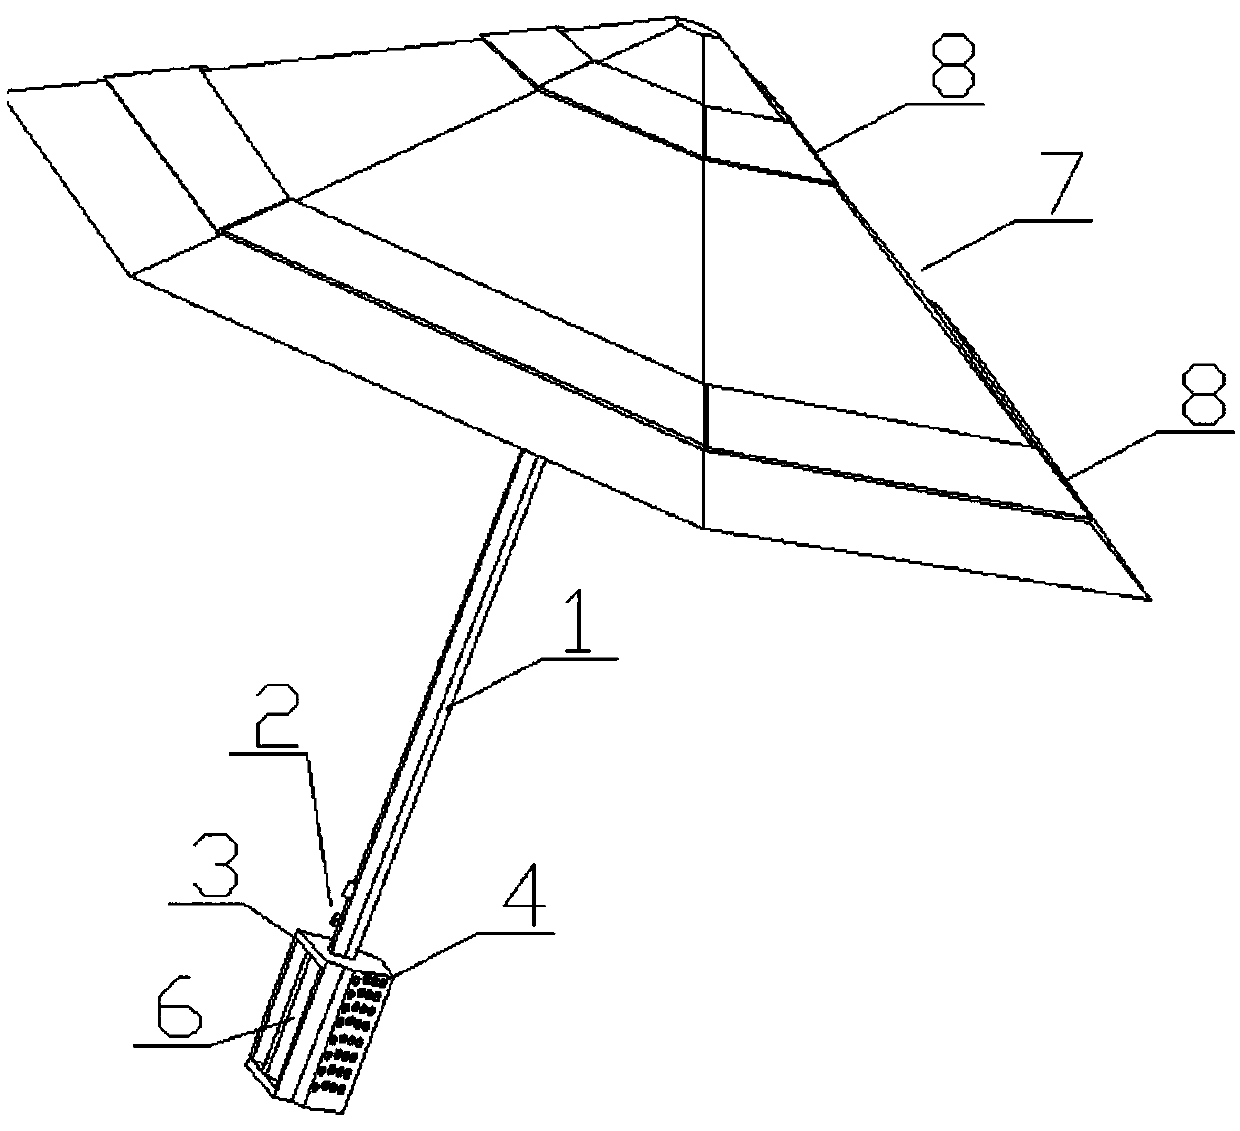 Night umbrella with lighting and reflecting functions